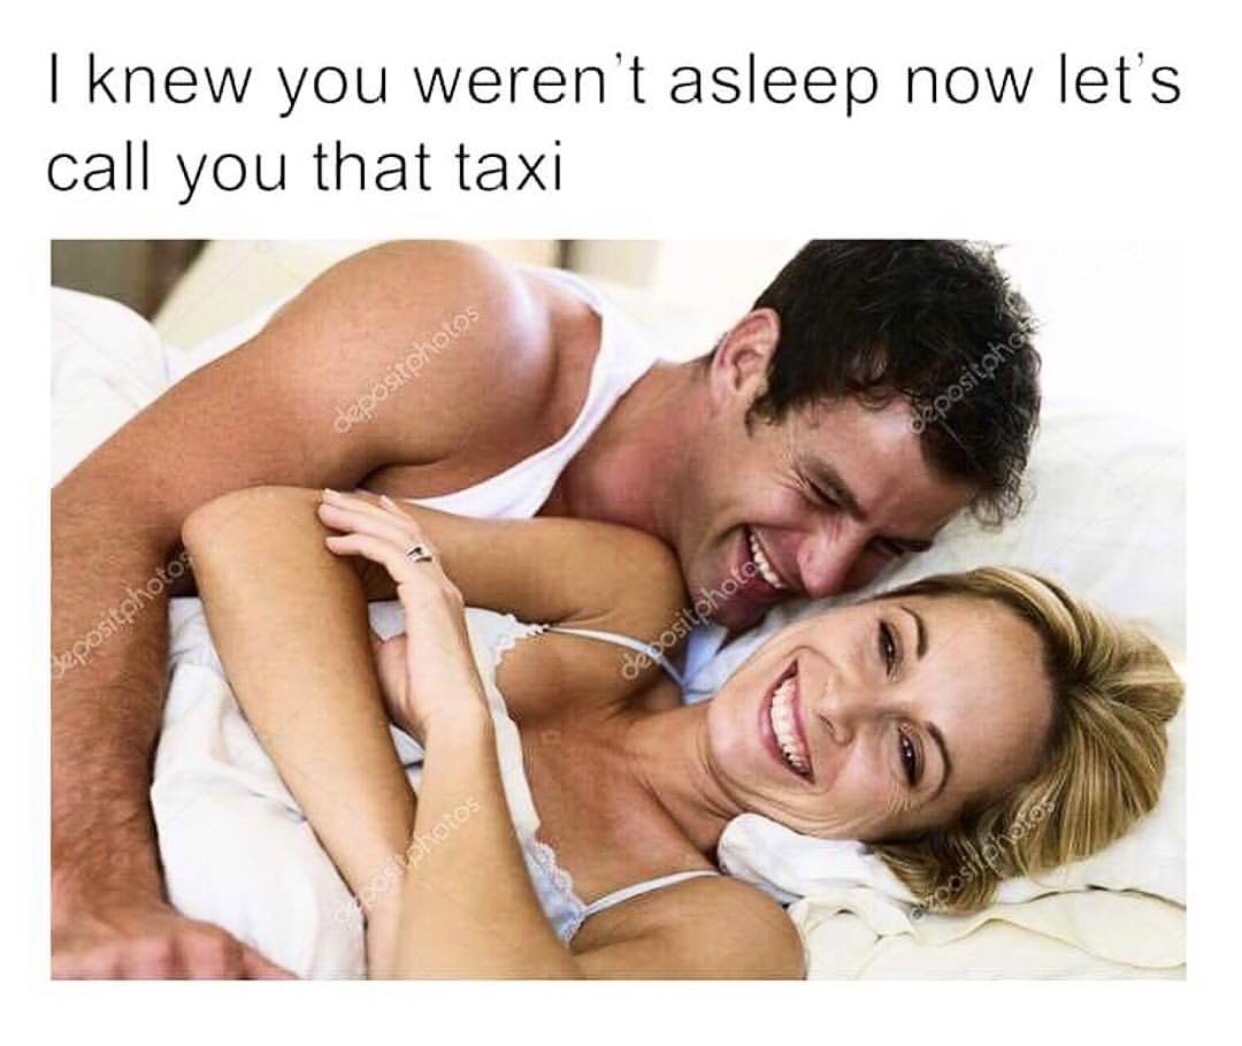 memes - love - I knew you weren't asleep now let's call you that taxi depositphotos depositphot epositphotos cepositphotos Shotos